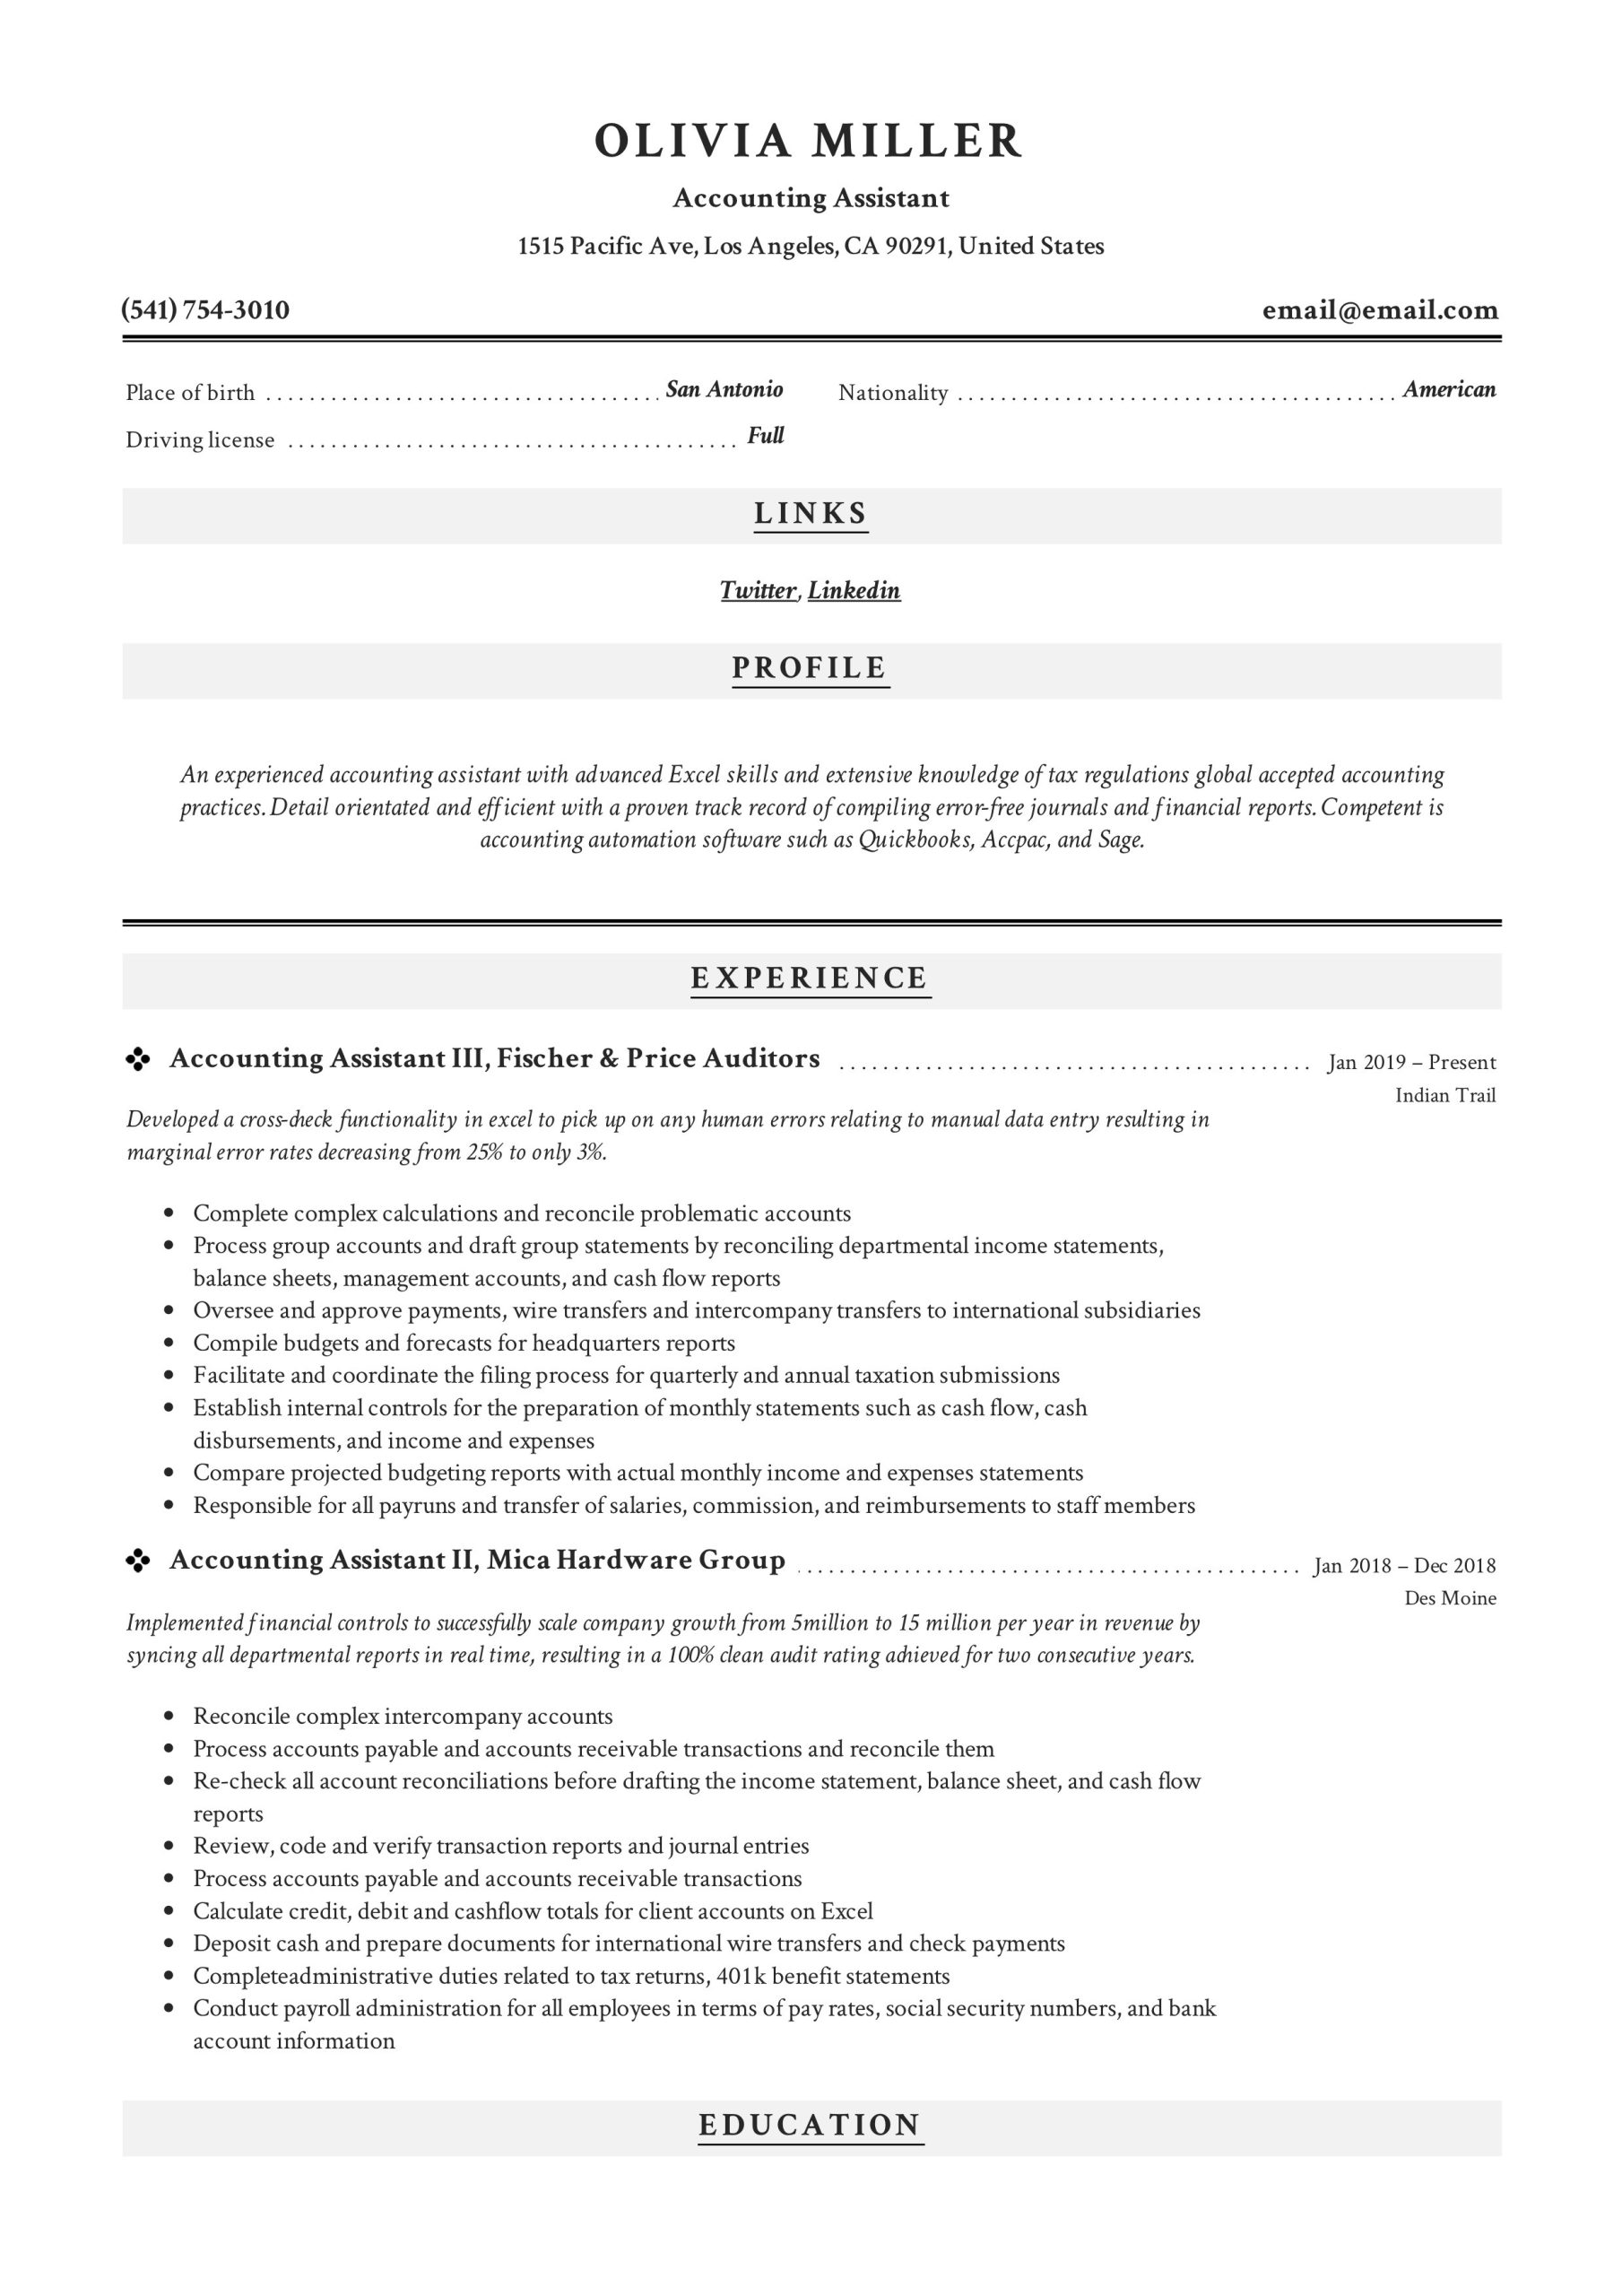 Sample Resume for Accontant Job In Usa Accounting & Finance Resume Examples 2022 Free Pdf’s